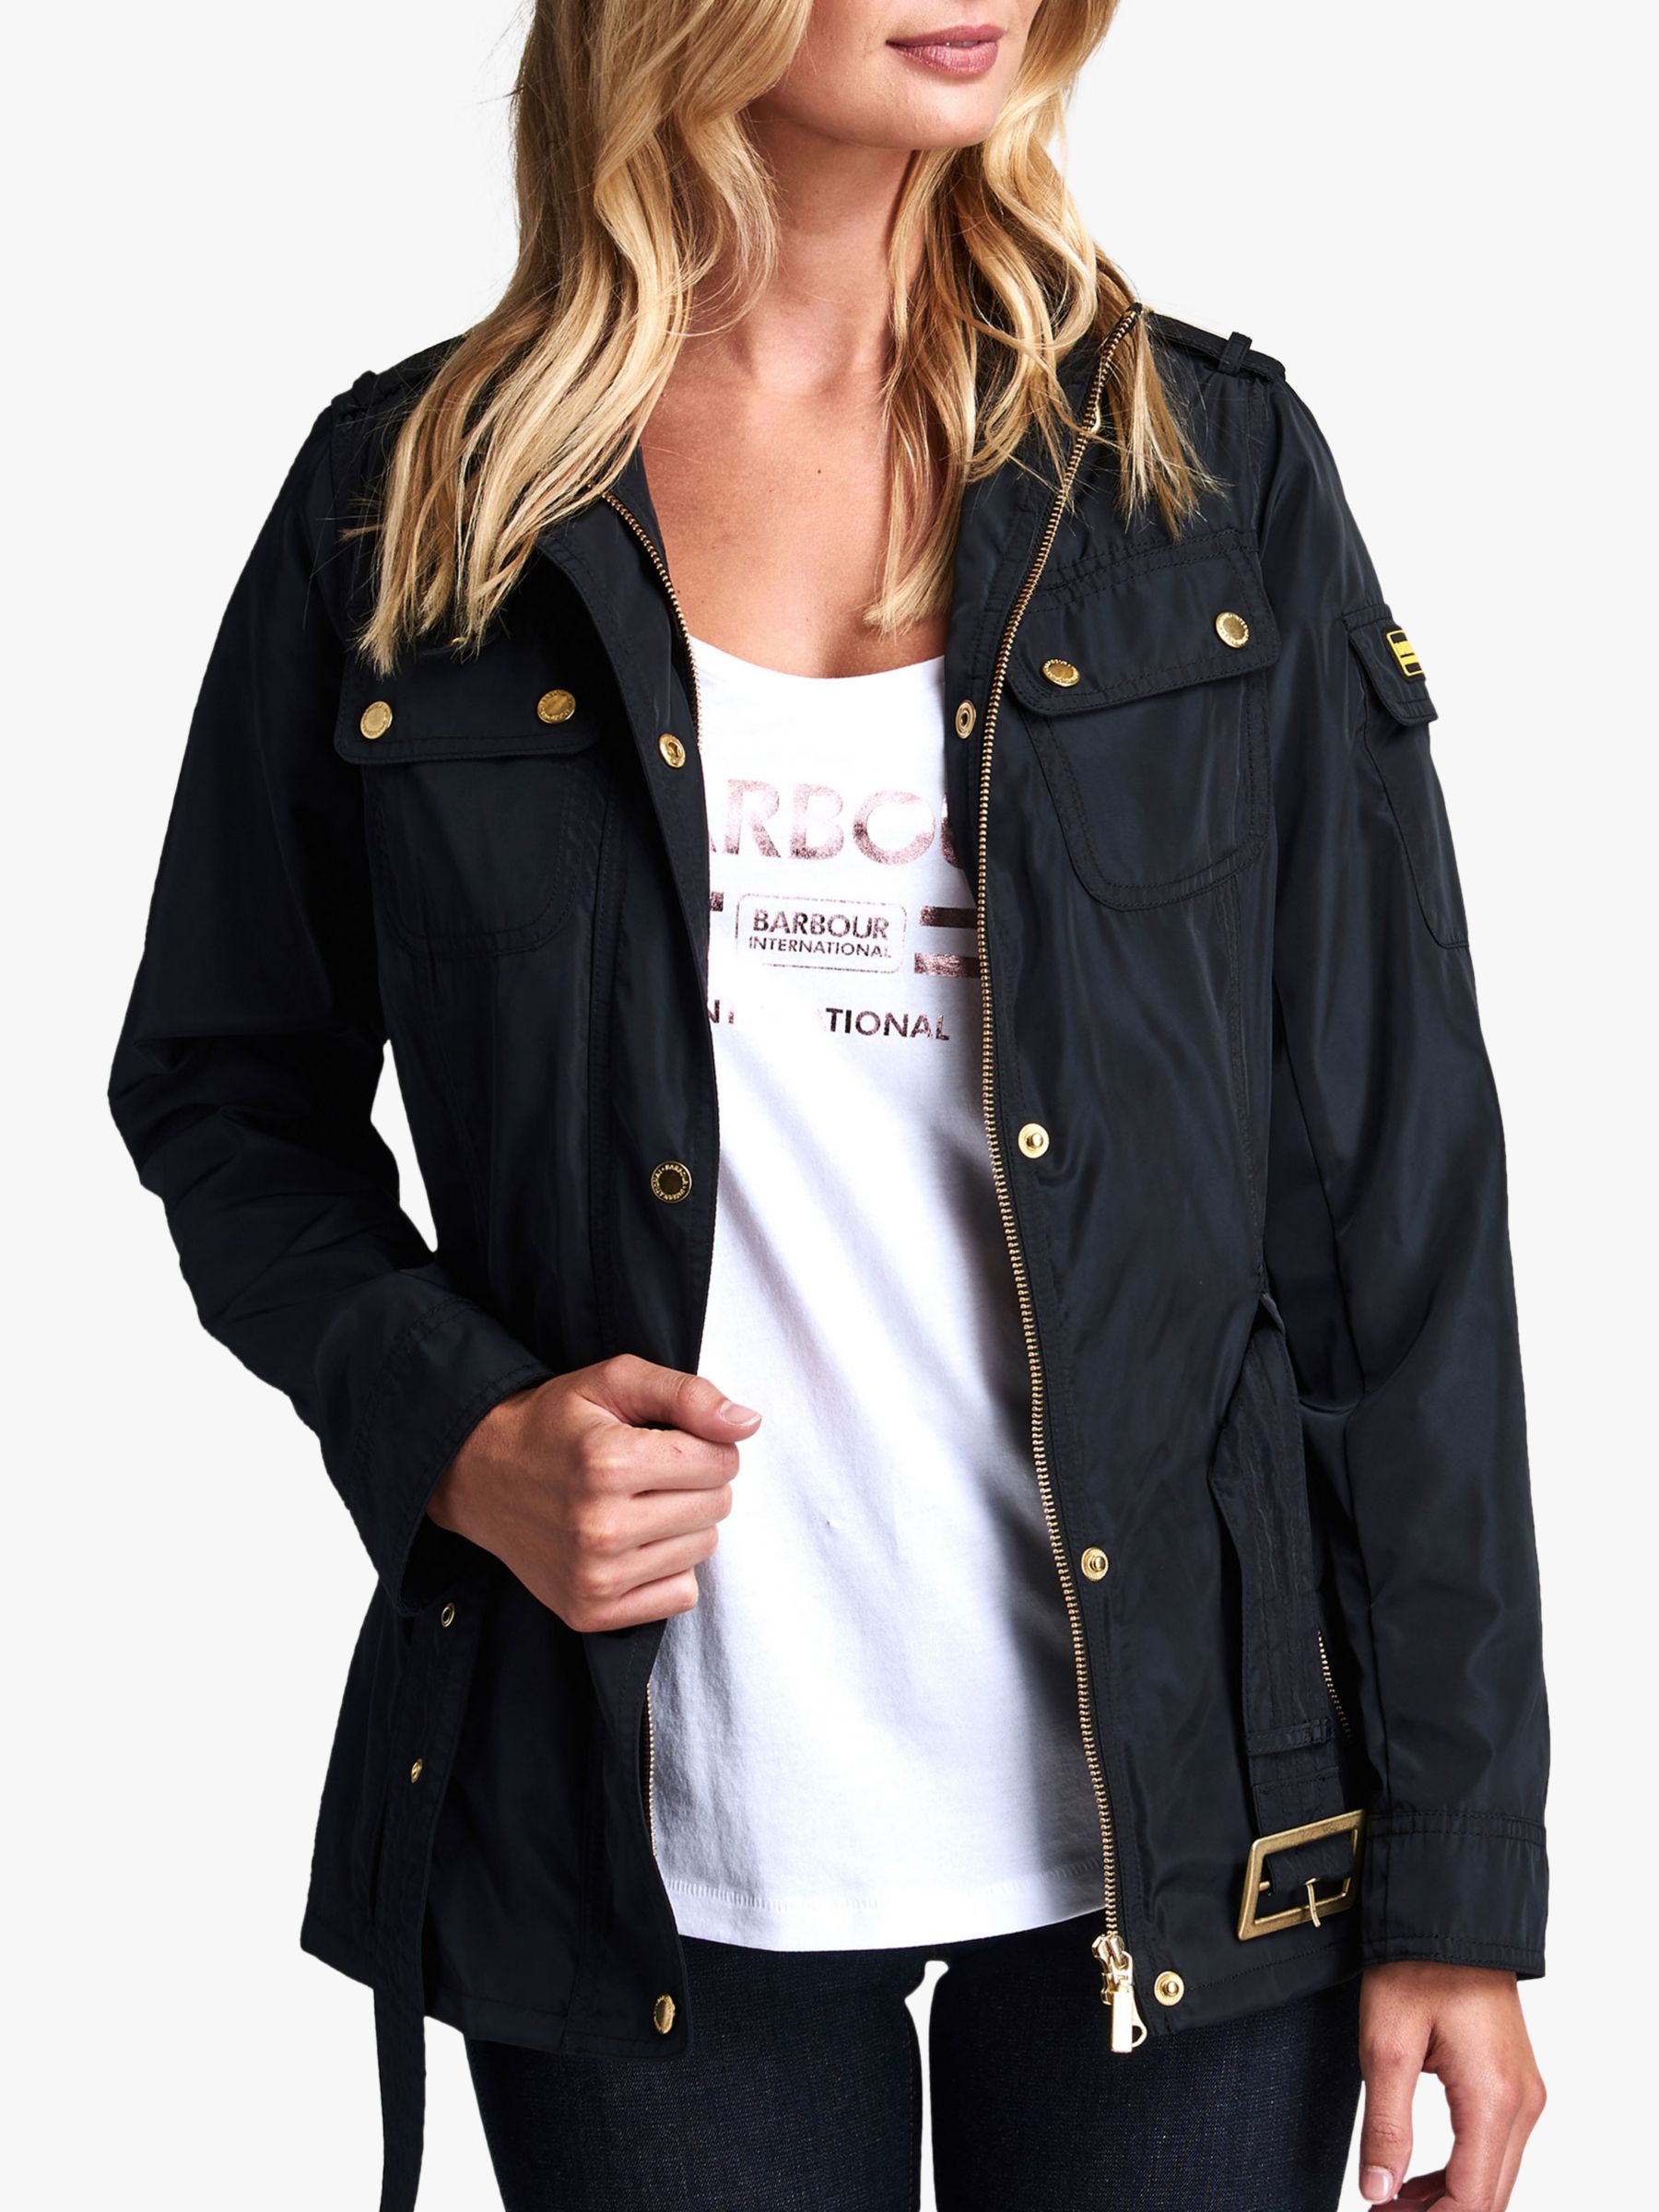 barbour international casual jacket womens